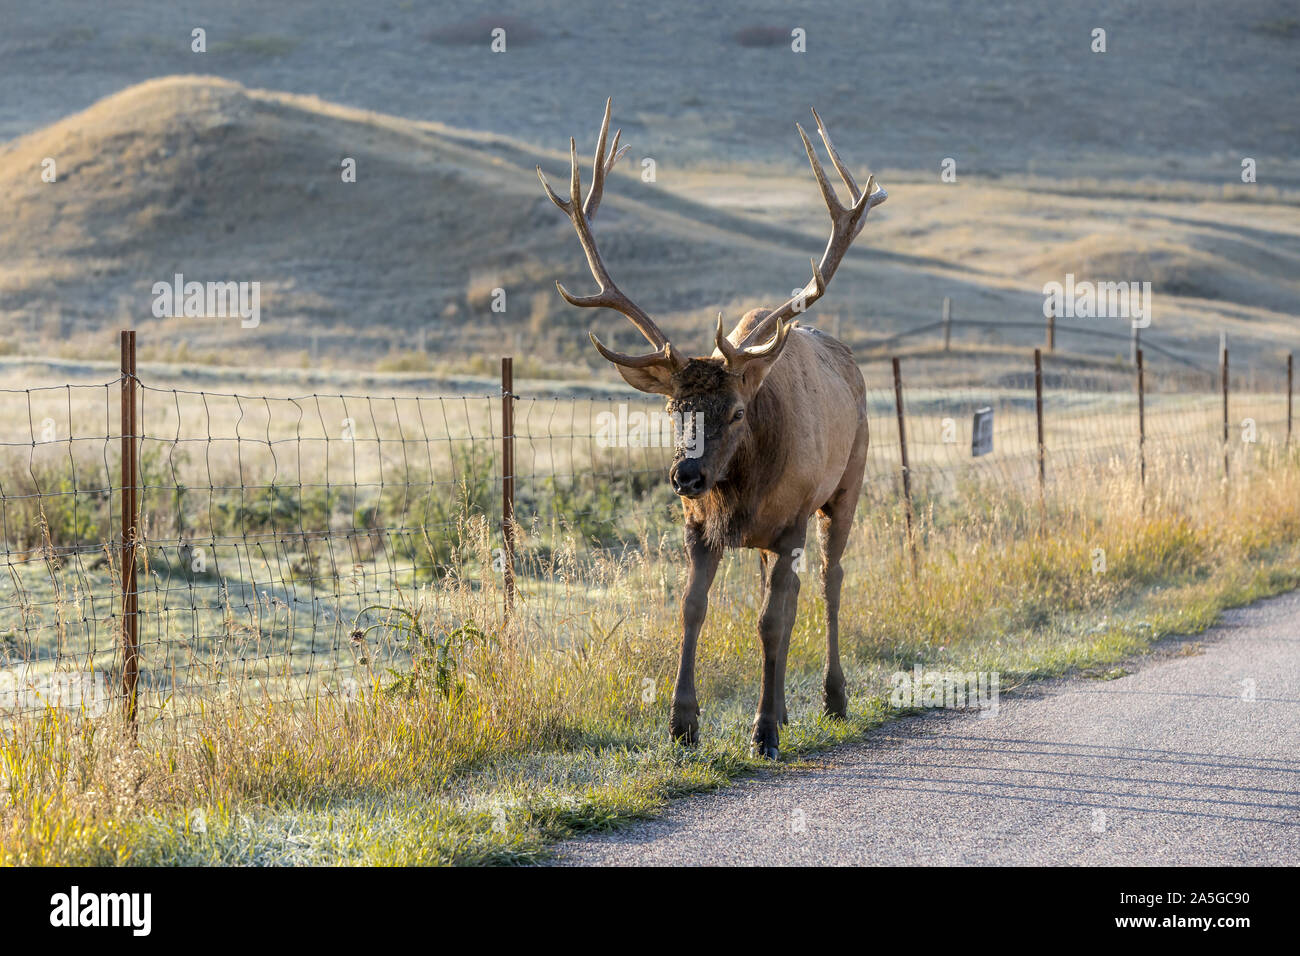 A bull elk is walking by a road at the National Elk and Bison range in Montana. Stock Photo